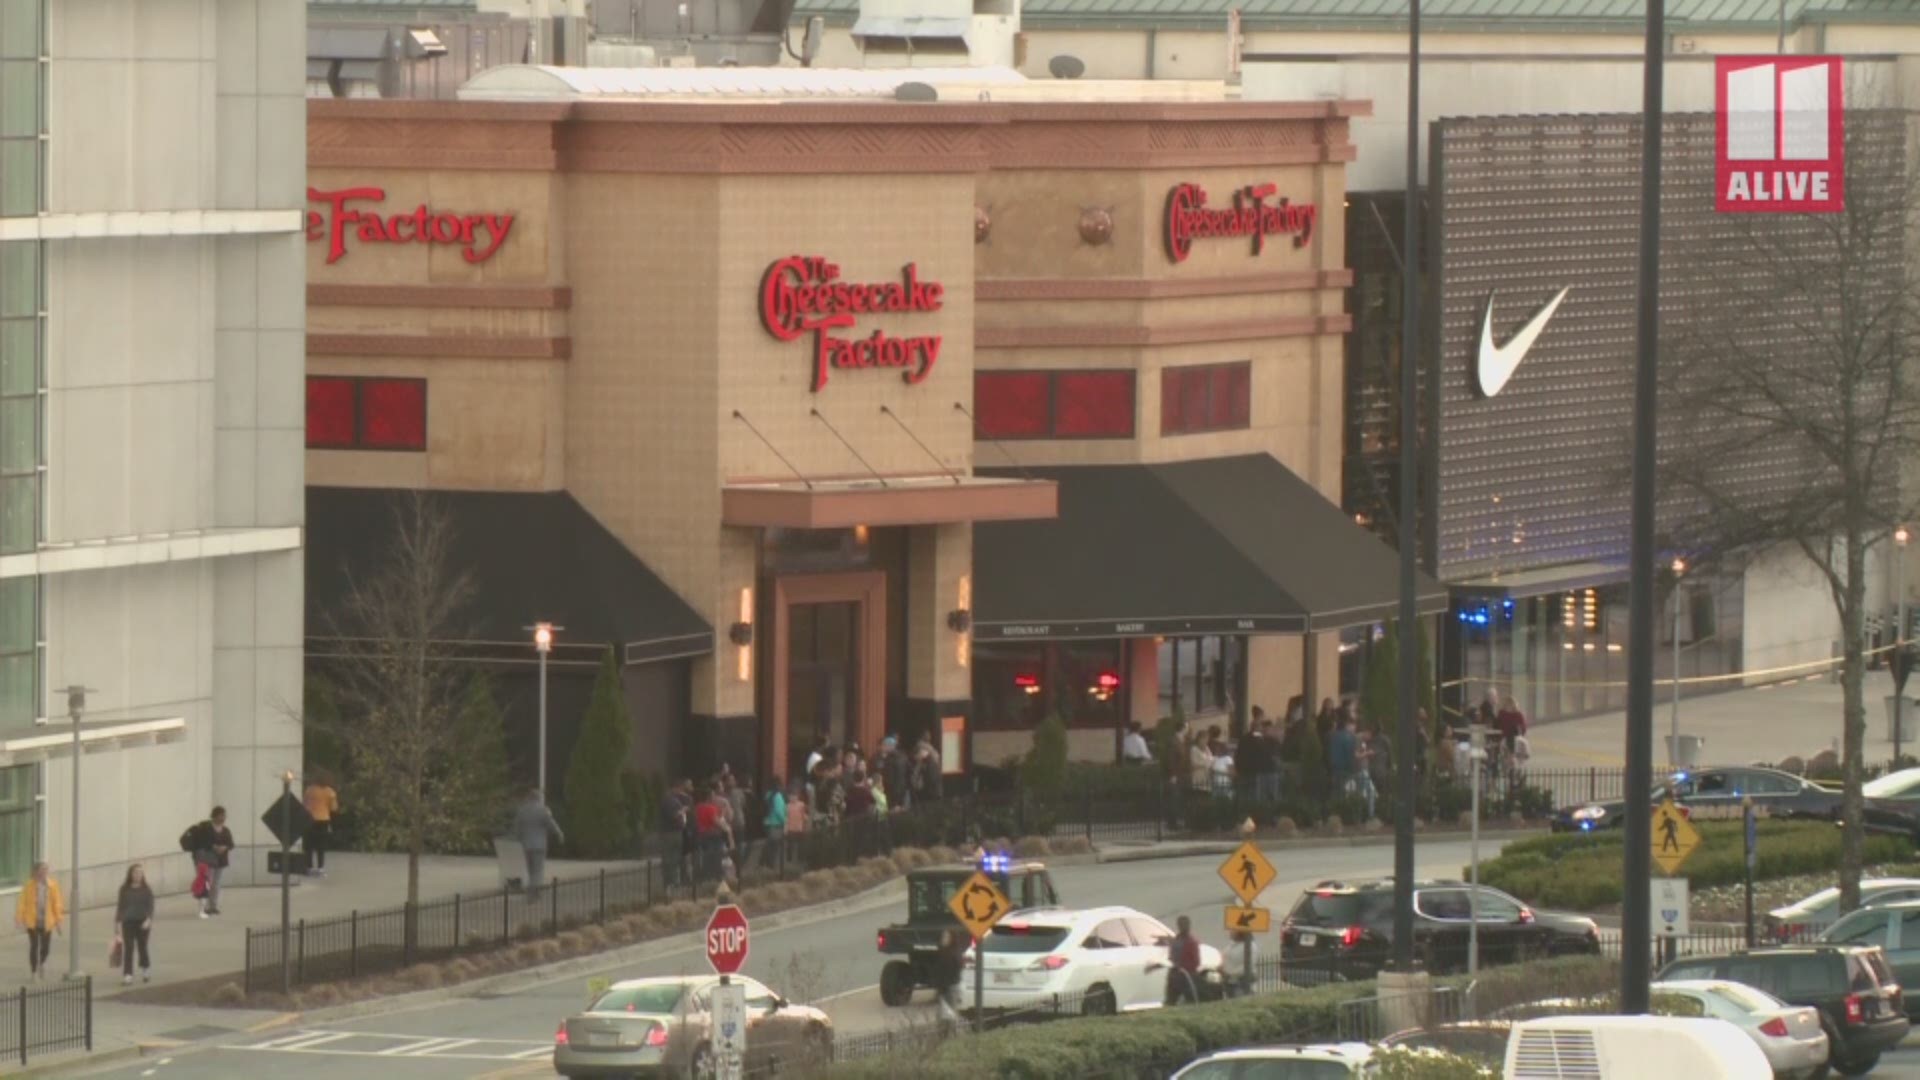 The Cheesecake Factory Sends Letter Telling Lenox Square It Won't